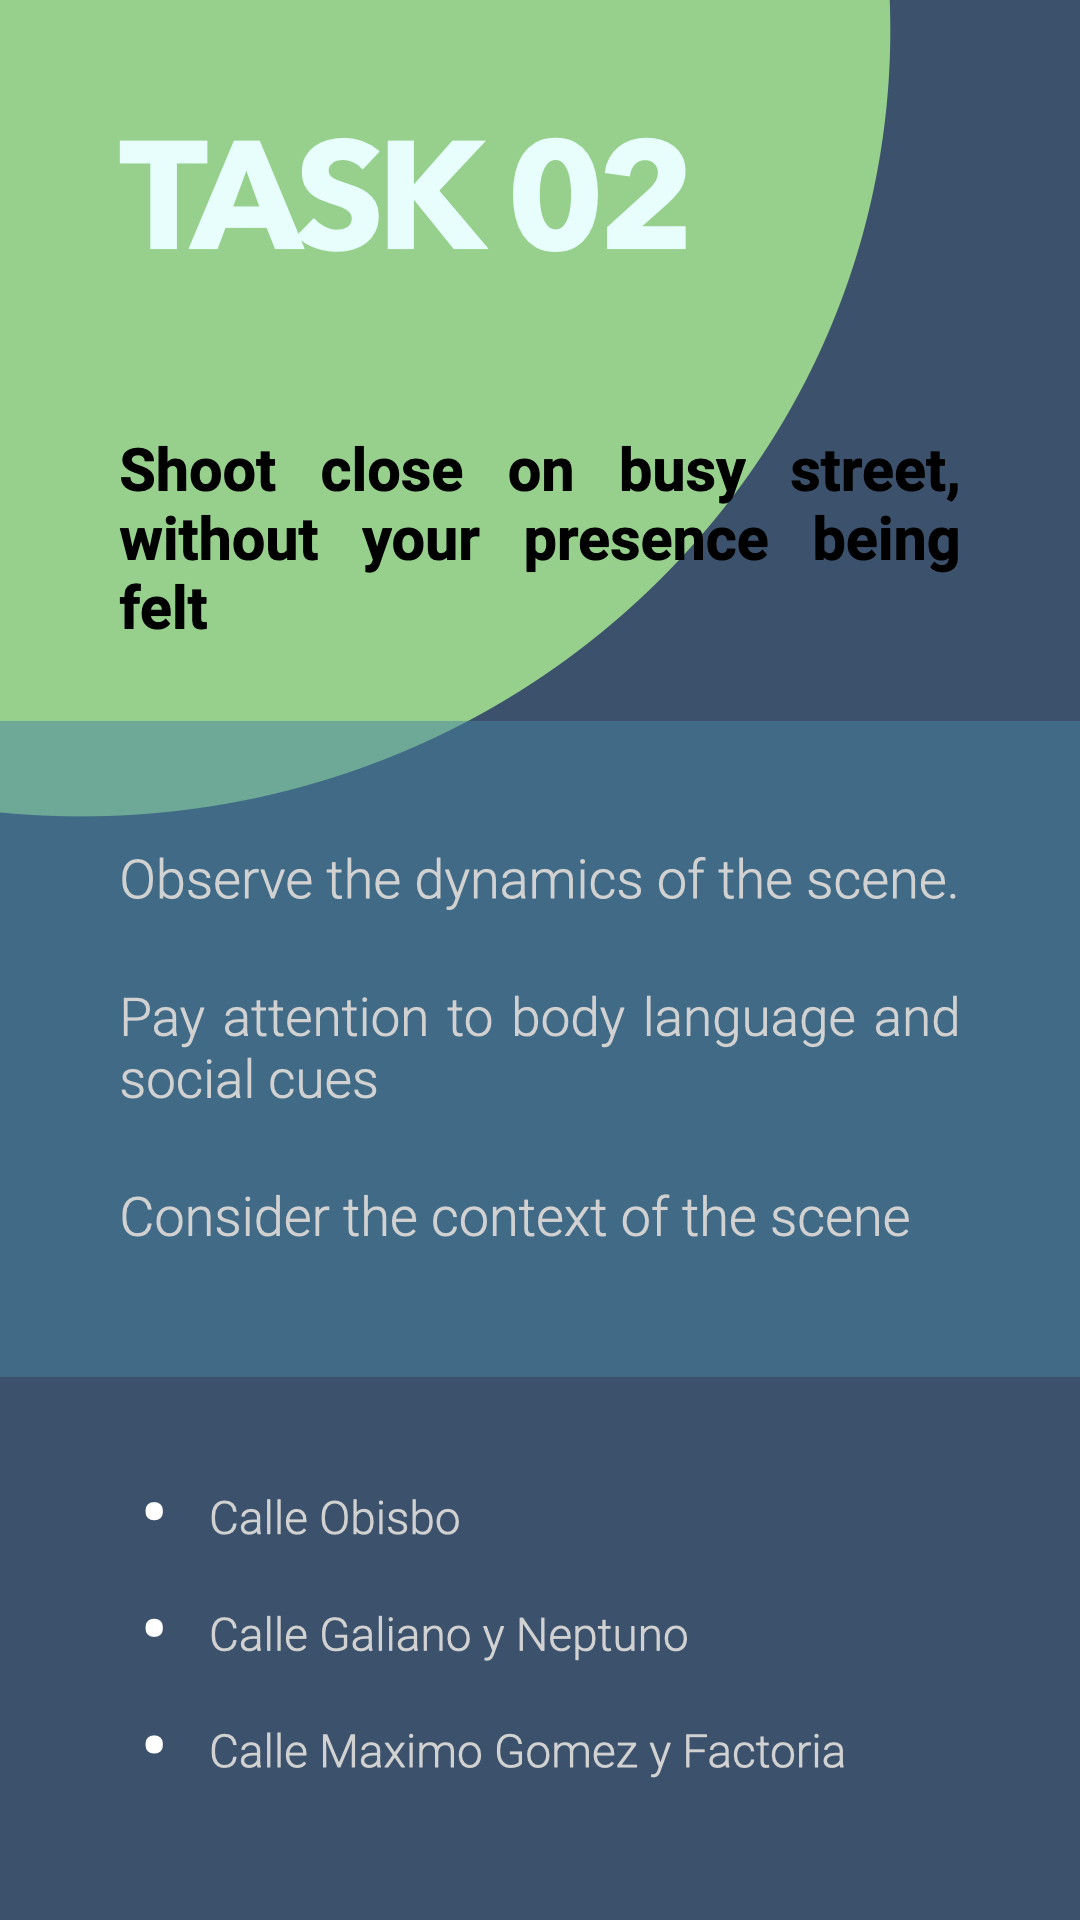 Task 02 | Shoot close on busy street, without your presence being felt